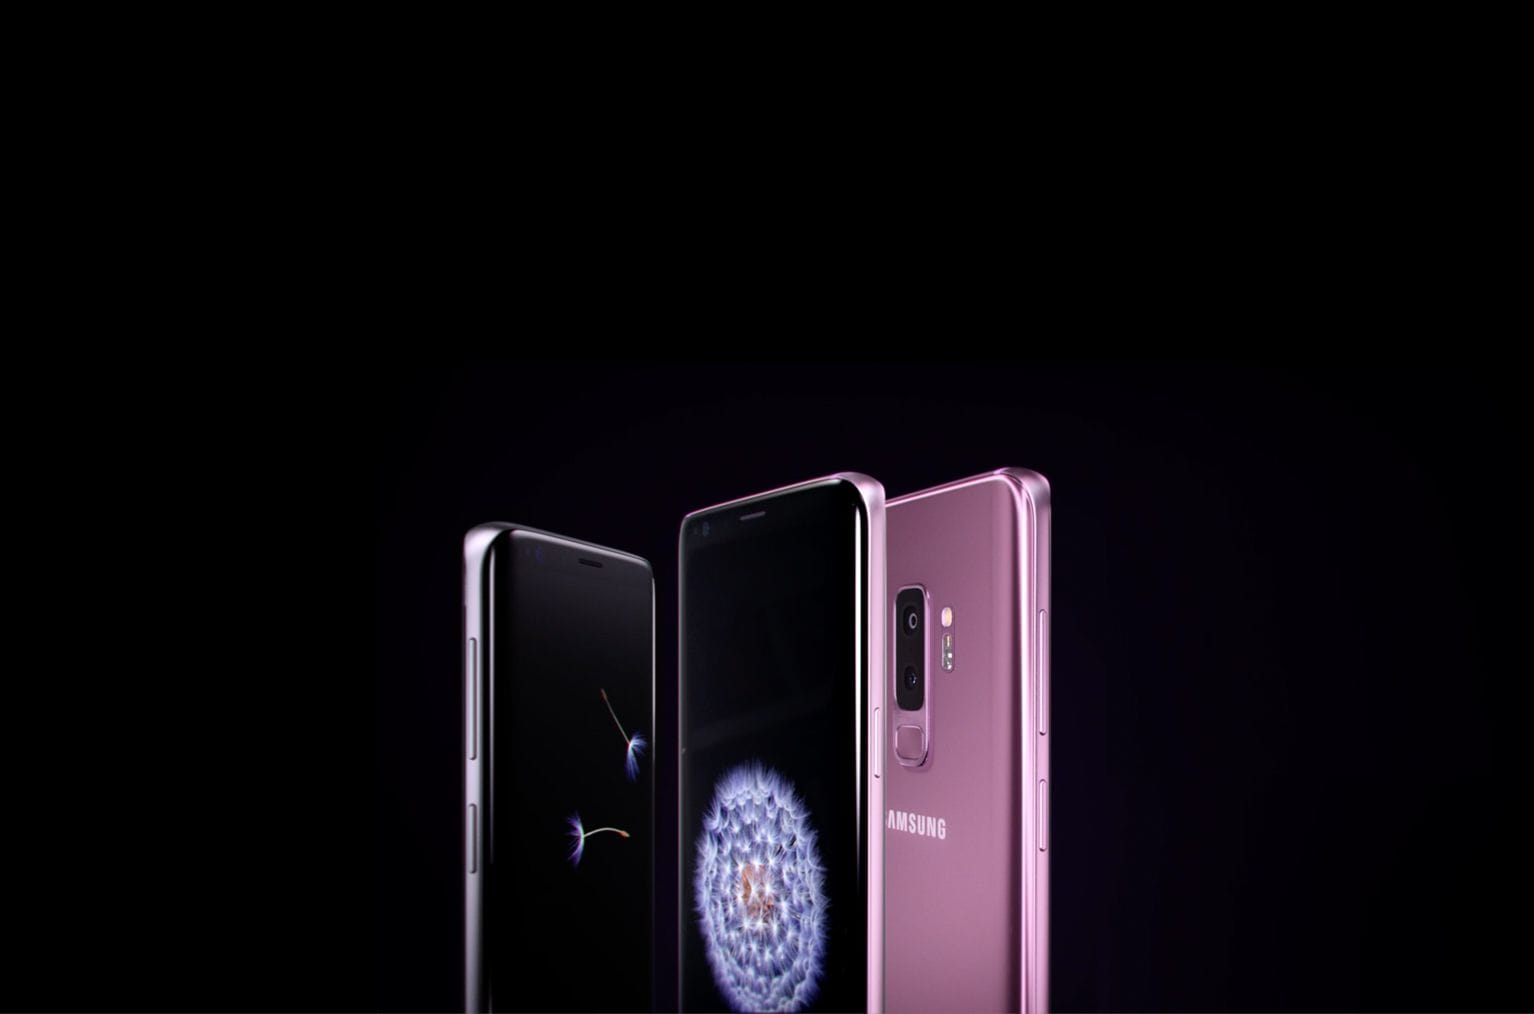 Samsung S9 Logo - Samsung Galaxy S9 and S9+ – The Official Samsung Galaxy Site